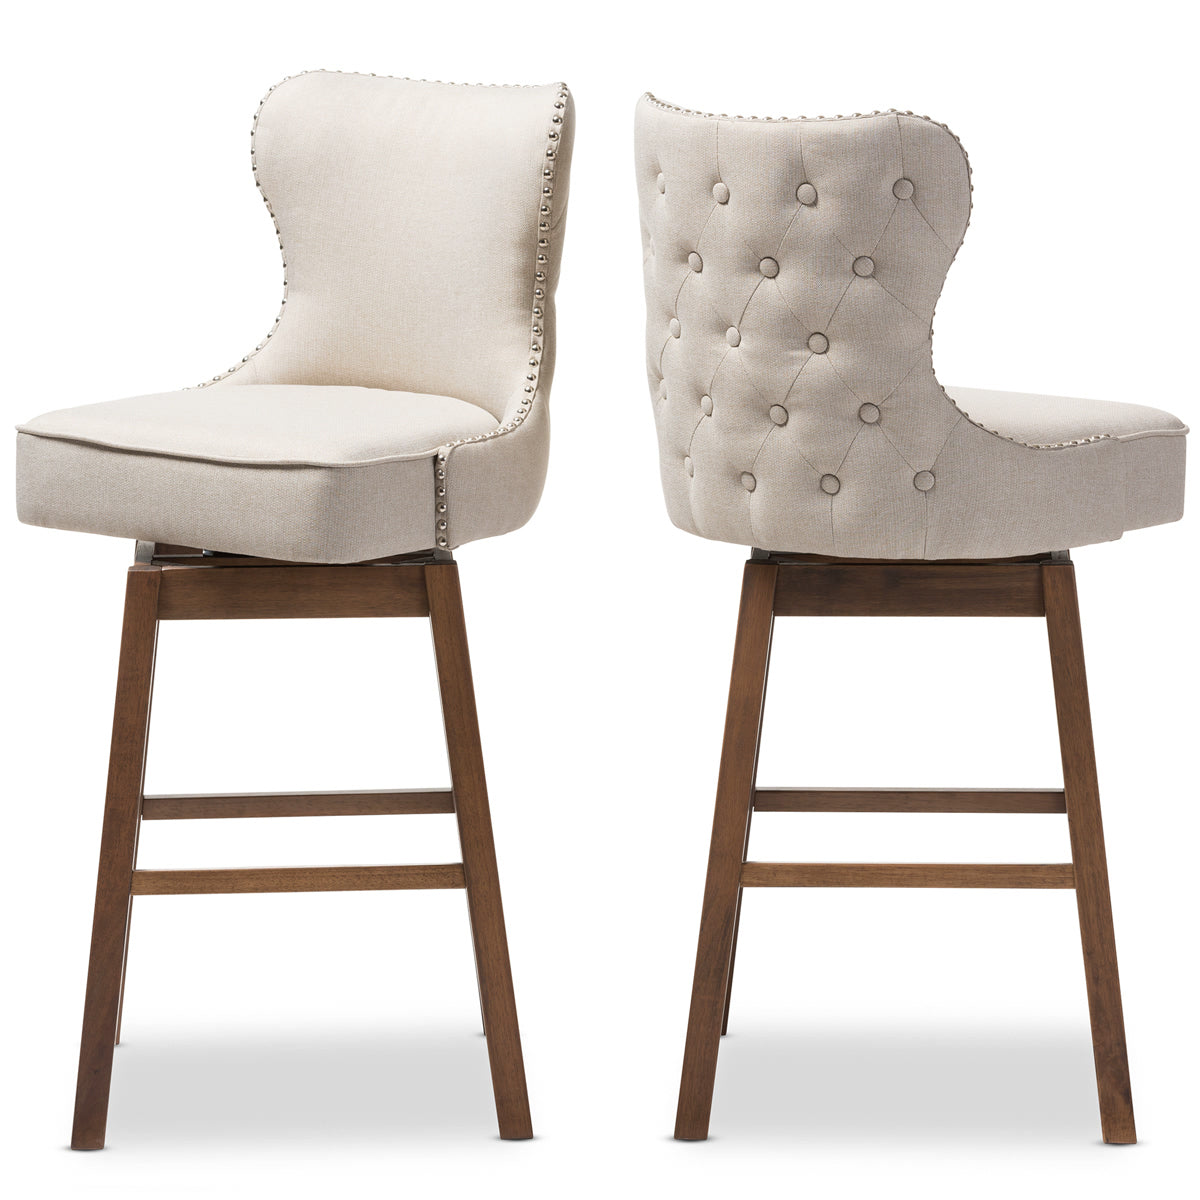 Baxton Studio Gradisca Modern and Contemporary Brown Wood Finishing and Light Beige Fabric Button-Tufted Upholstered Swivel Barstool Baxton Studio-Bar Stools-Minimal And Modern - 5